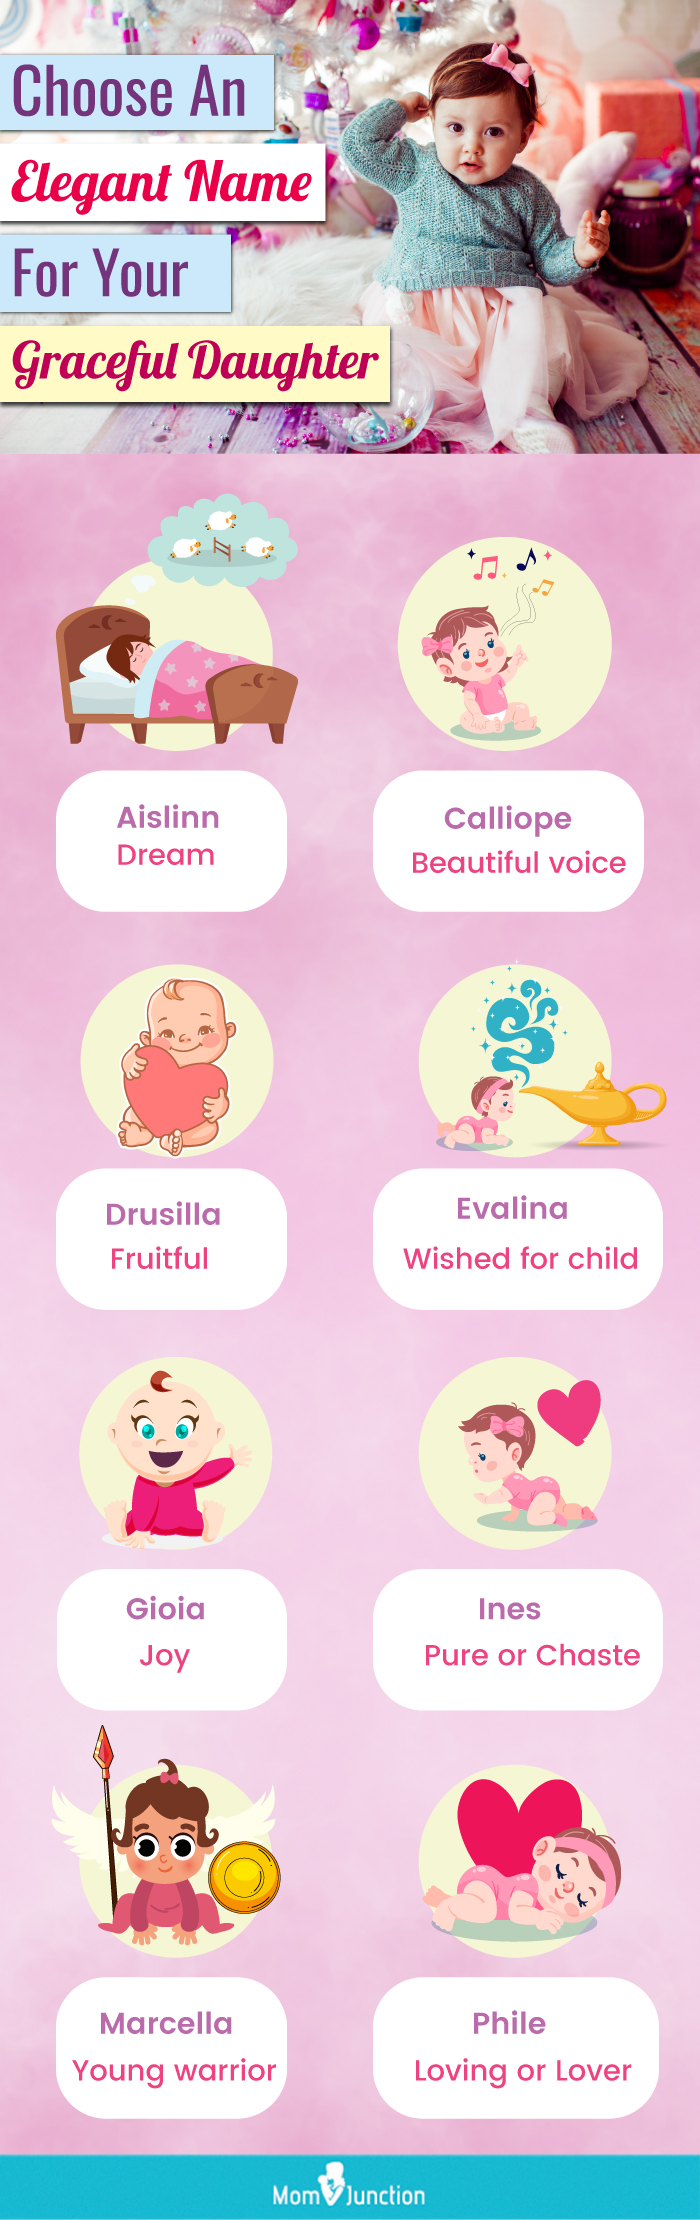  choose an elegant name for your graceful daughter (infographic)